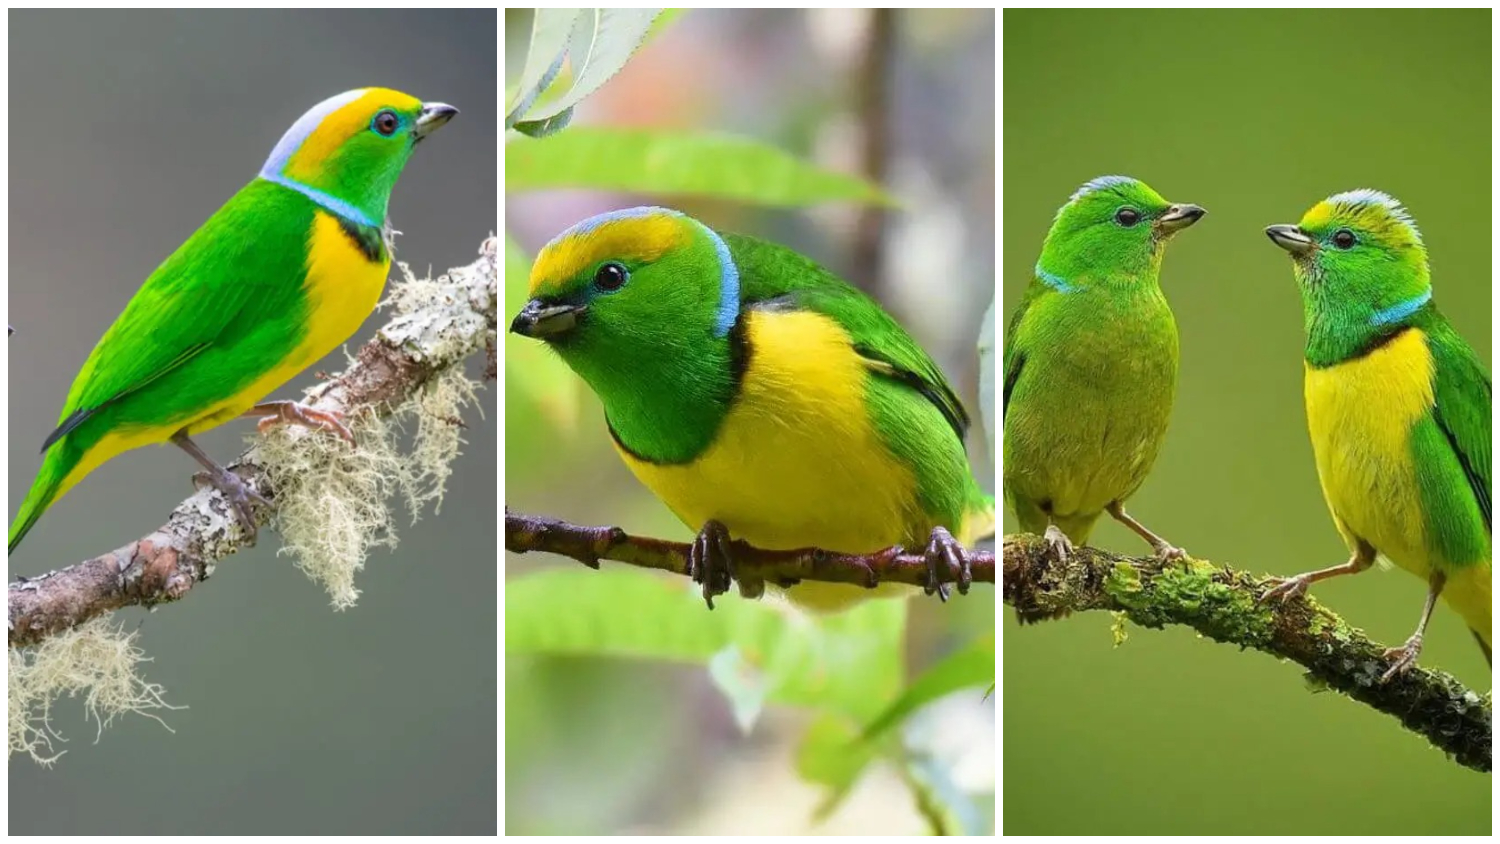 Meet Golden-browed Chlorophonia with Green-Yellow Feathers That Are Sure to Impress You